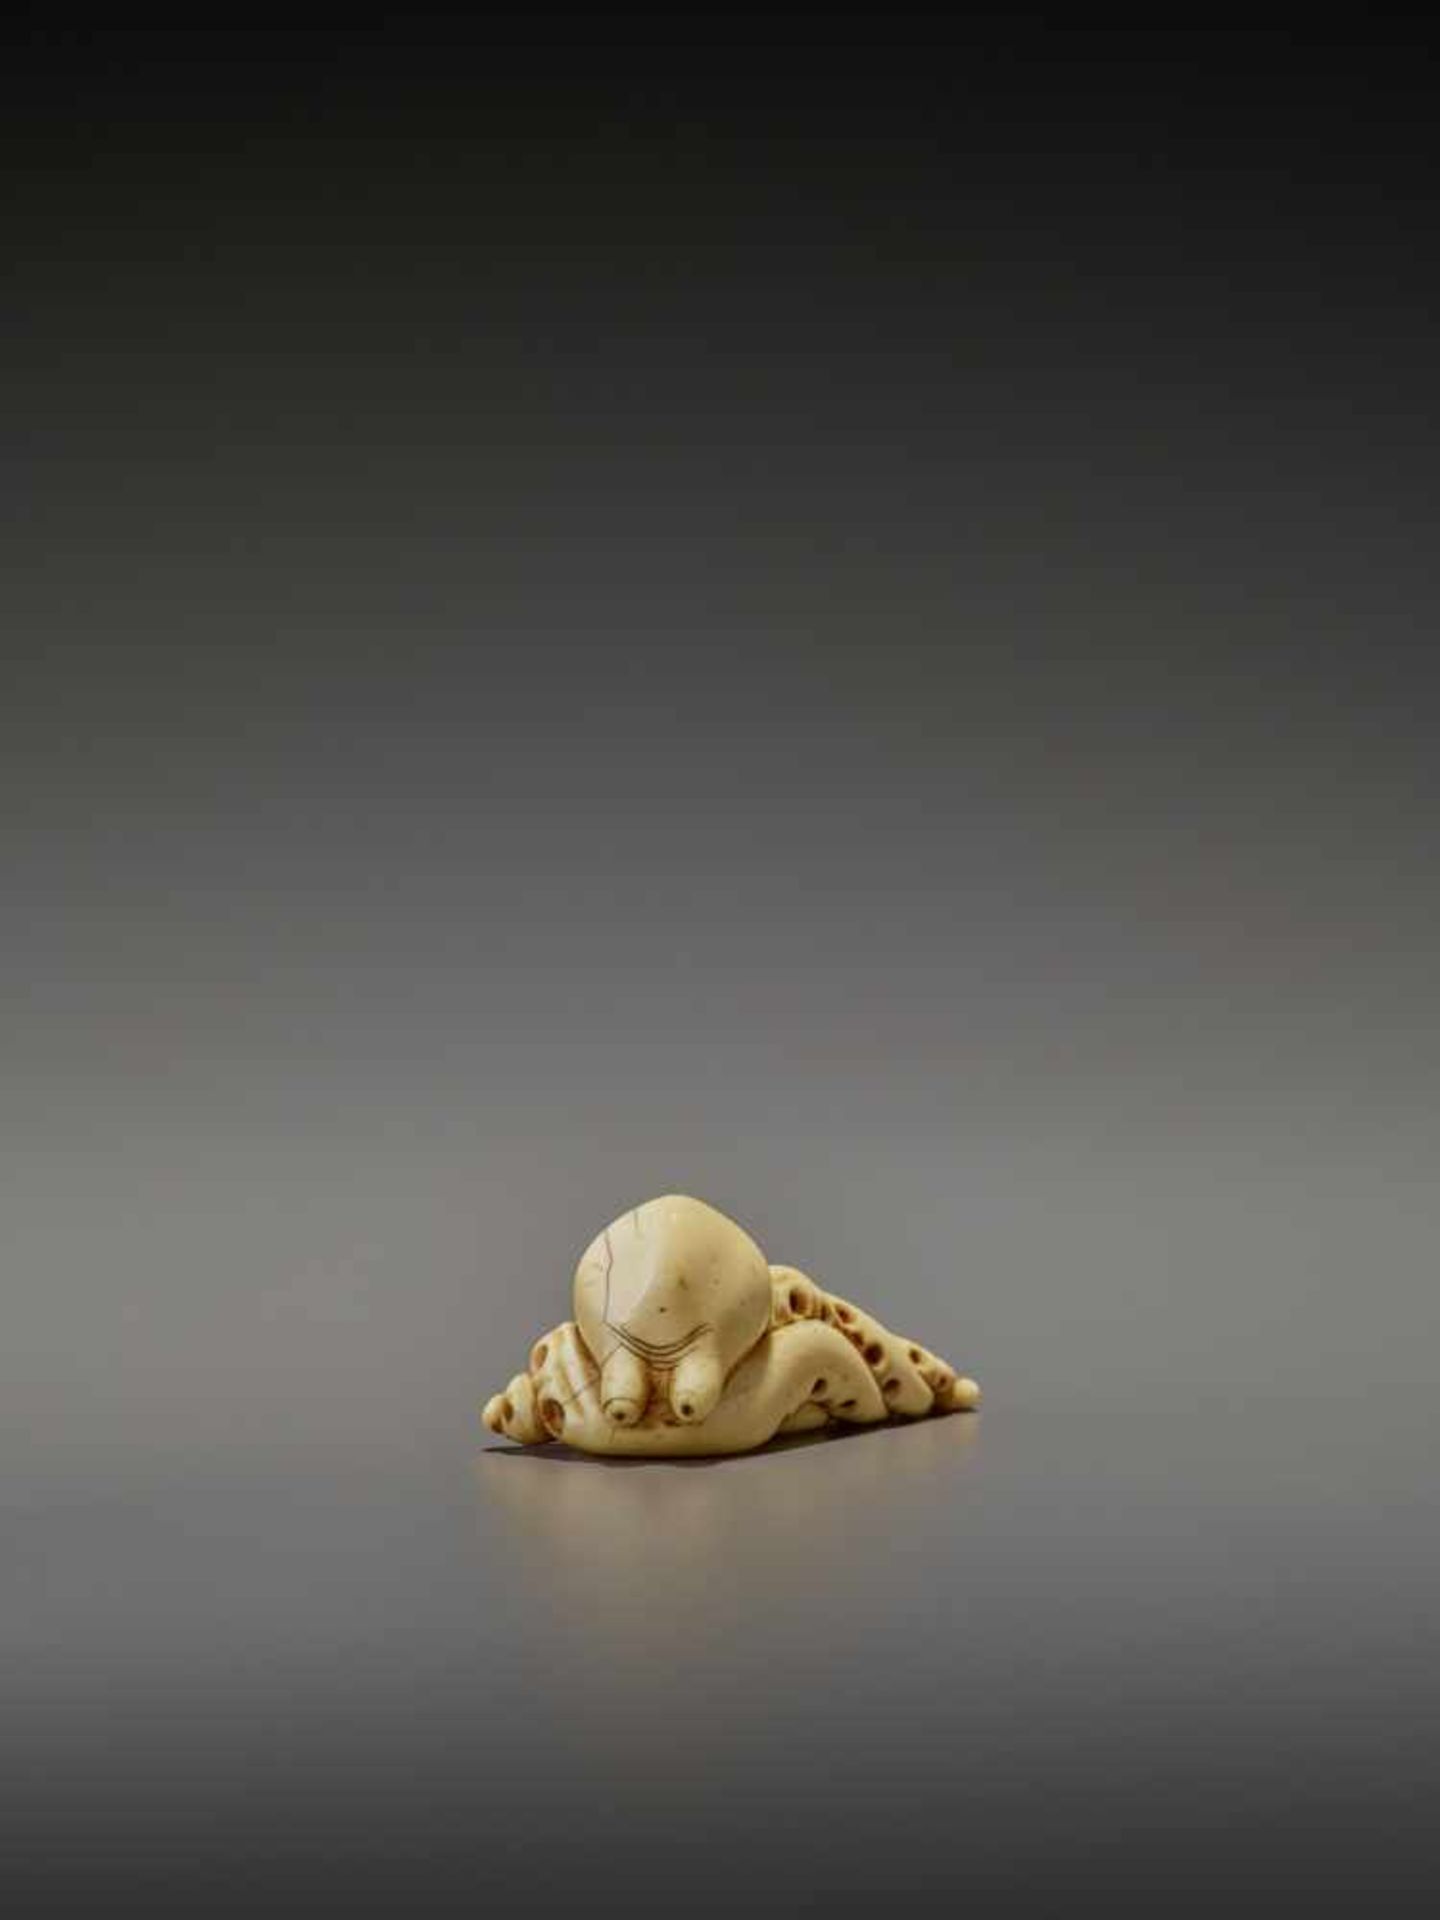 A RARE IVORY NETSUKE OF AN OCTOPUS UnsignedJapan, early 19th century, Edo period (1615-1868)The - Image 11 of 11